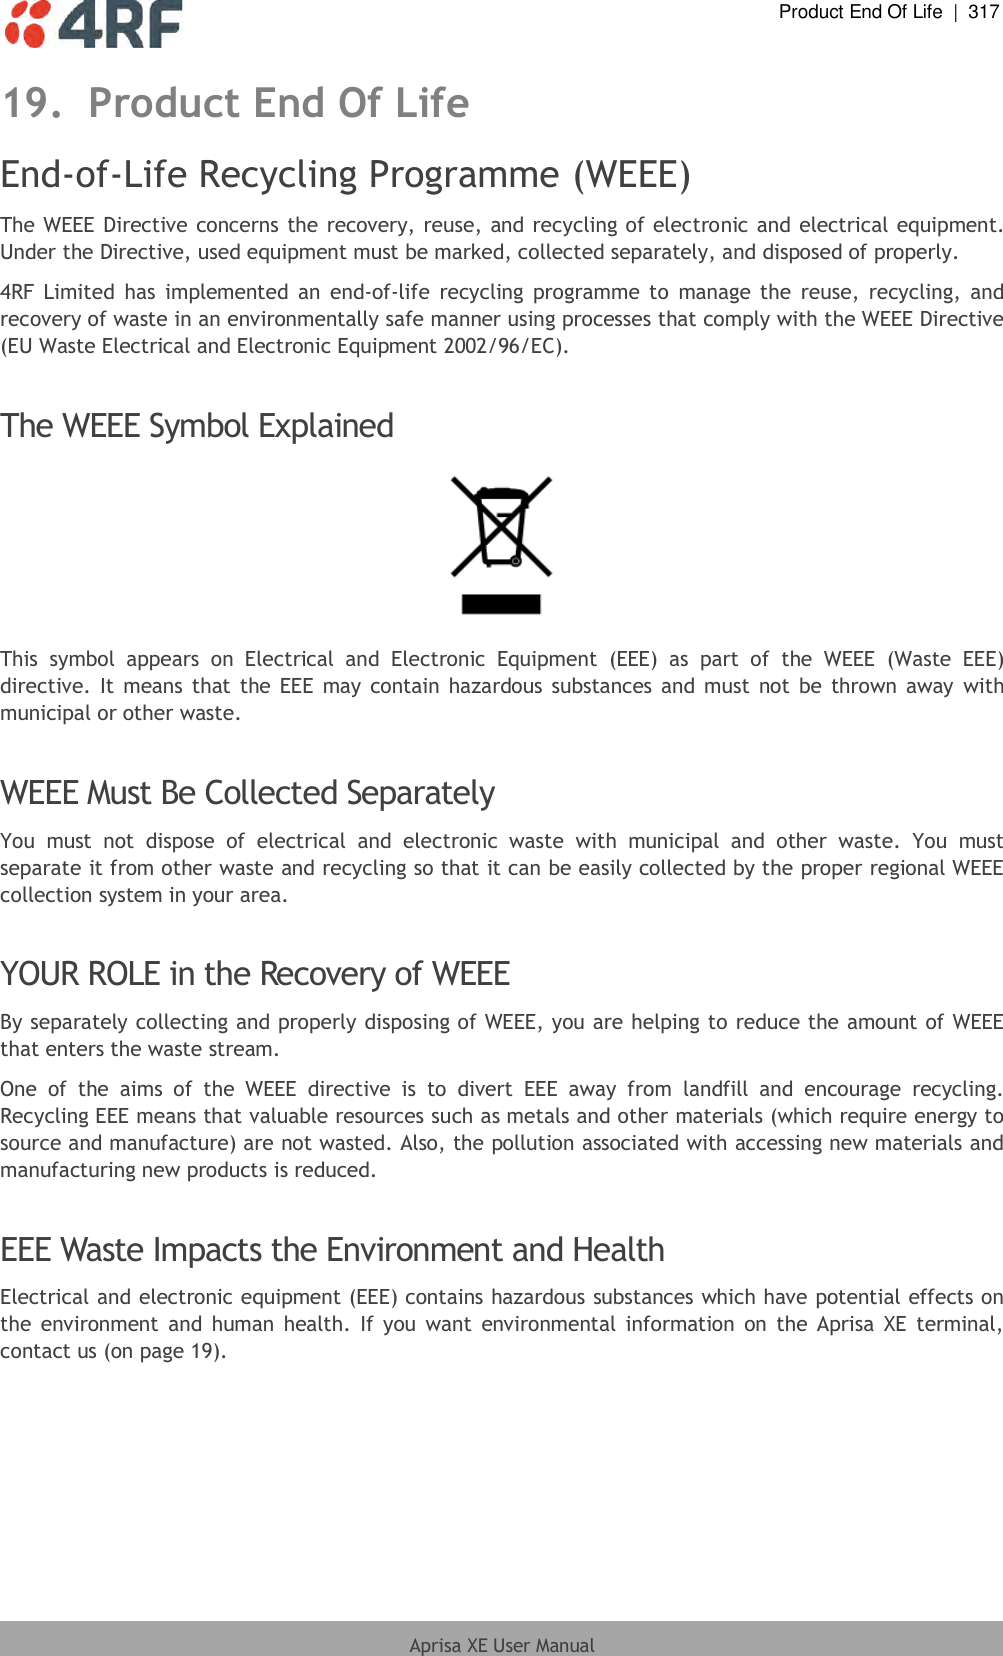  Product End Of Life  |  317  Aprisa XE User Manual  19. Product End Of Life End-of-Life Recycling Programme (WEEE) The WEEE Directive concerns the recovery, reuse, and recycling of electronic and electrical equipment. Under the Directive, used equipment must be marked, collected separately, and disposed of properly. 4RF Limited  has  implemented an  end-of-life  recycling  programme to  manage the  reuse,  recycling, and recovery of waste in an environmentally safe manner using processes that comply with the WEEE Directive (EU Waste Electrical and Electronic Equipment 2002/96/EC).  The WEEE Symbol Explained  This  symbol  appears  on  Electrical  and  Electronic  Equipment  (EEE)  as  part  of  the  WEEE  (Waste  EEE) directive. It  means that the EEE may contain hazardous  substances  and must  not be thrown away  with municipal or other waste.  WEEE Must Be Collected Separately You  must  not  dispose  of  electrical  and  electronic  waste  with  municipal  and  other  waste.  You  must separate it from other waste and recycling so that it can be easily collected by the proper regional WEEE collection system in your area.  YOUR ROLE in the Recovery of WEEE By separately collecting and properly disposing of WEEE, you are helping to reduce the amount of WEEE that enters the waste stream. One  of  the  aims  of  the  WEEE  directive  is  to  divert  EEE  away  from  landfill  and  encourage  recycling. Recycling EEE means that valuable resources such as metals and other materials (which require energy to source and manufacture) are not wasted. Also, the pollution associated with accessing new materials and manufacturing new products is reduced.  EEE Waste Impacts the Environment and Health Electrical and electronic equipment (EEE) contains hazardous substances which have potential effects on the  environment  and human health.  If you  want  environmental information  on the  Aprisa  XE  terminal, contact us (on page 19).  